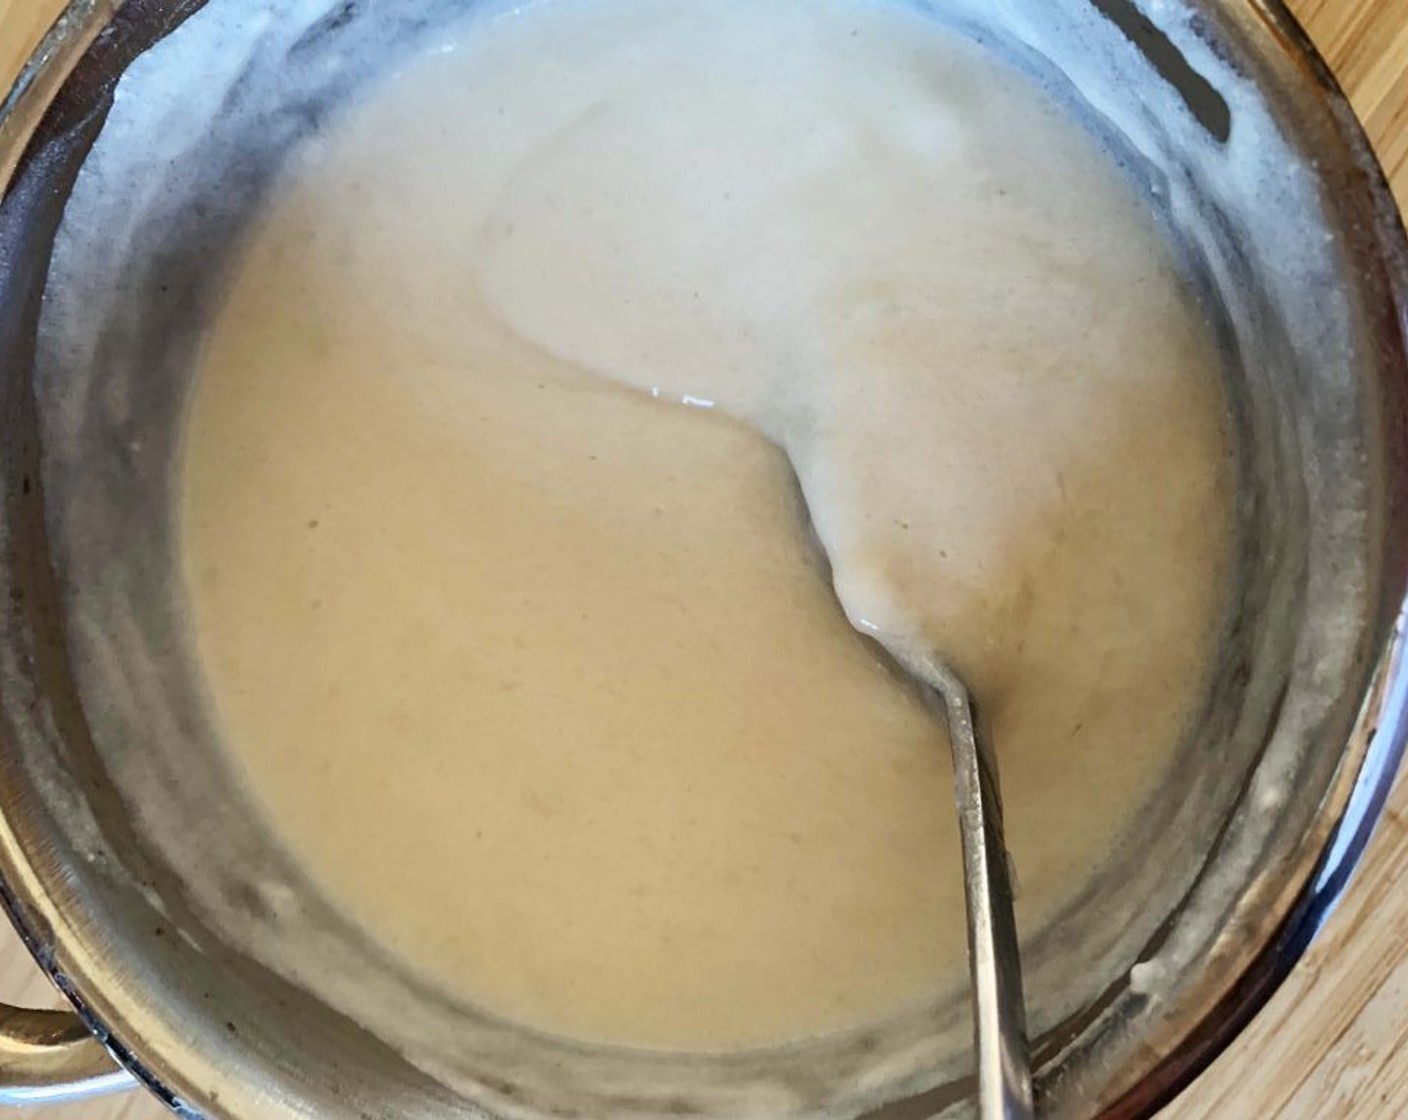 step 2 In a saucepan, dissolve Xanthan Gum (3/4 tsp) and Agar-Agar Powder (1/8 tsp) into a small quantity of milk. Then pour the rest of the milk and add the Maple Syrup (1 Tbsp). Bring to a gentle boil, stirring constantly until it starts to thicken.